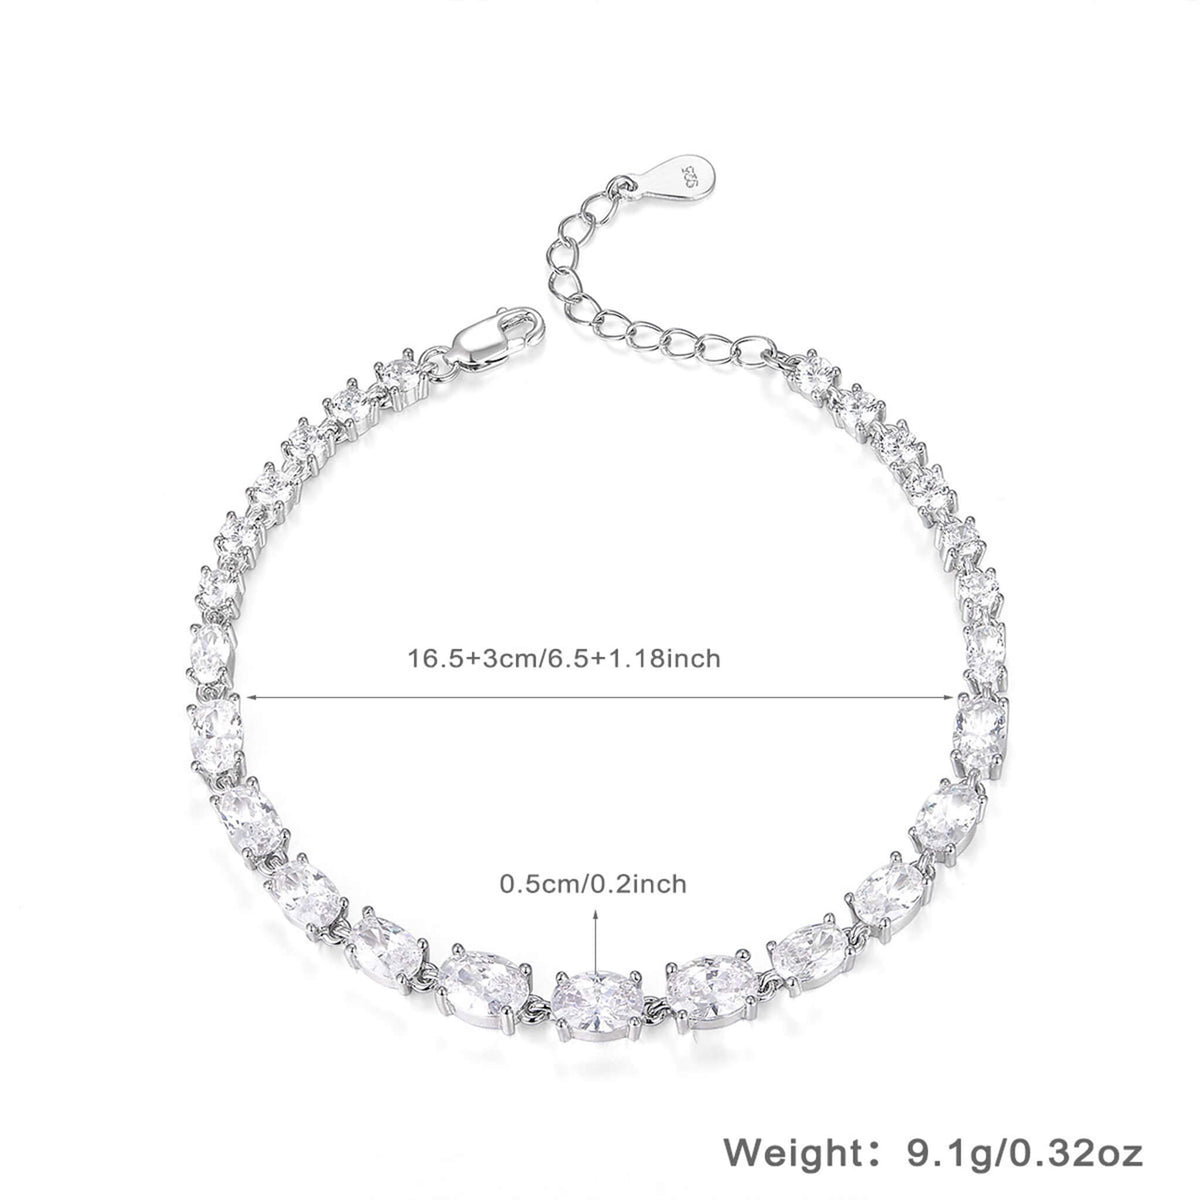 Luxurious 925 Silver Oval Cubic Zirconia Full Inlay Bracelet  UponBasics Silver  